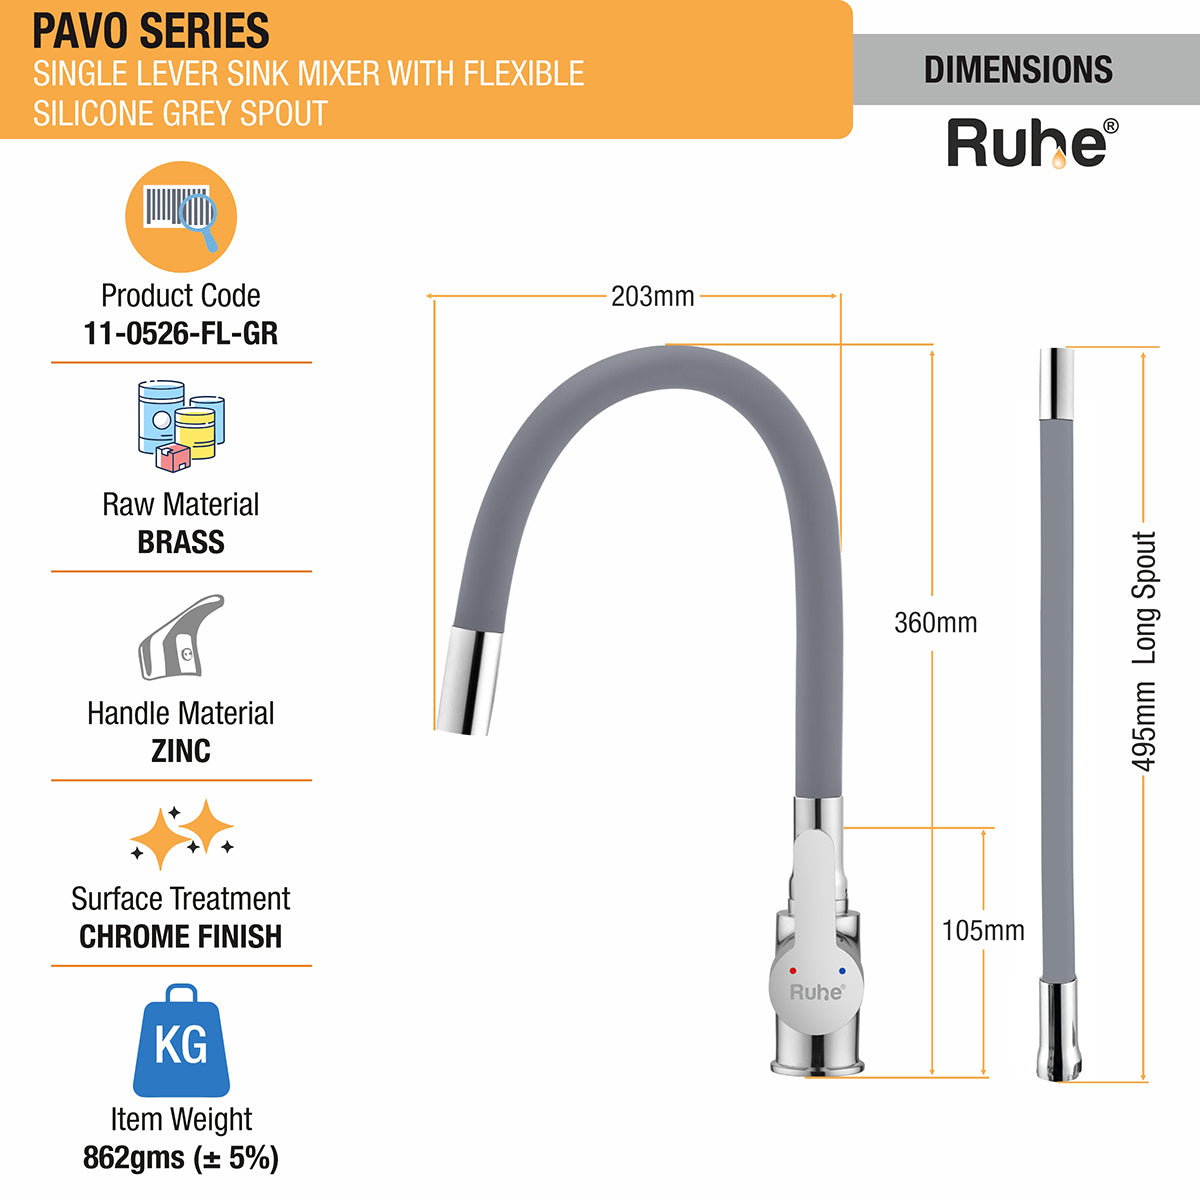 Pavo Single Lever Sink Mixer with Silicone Grey Flexible Spout dimensions and sizes